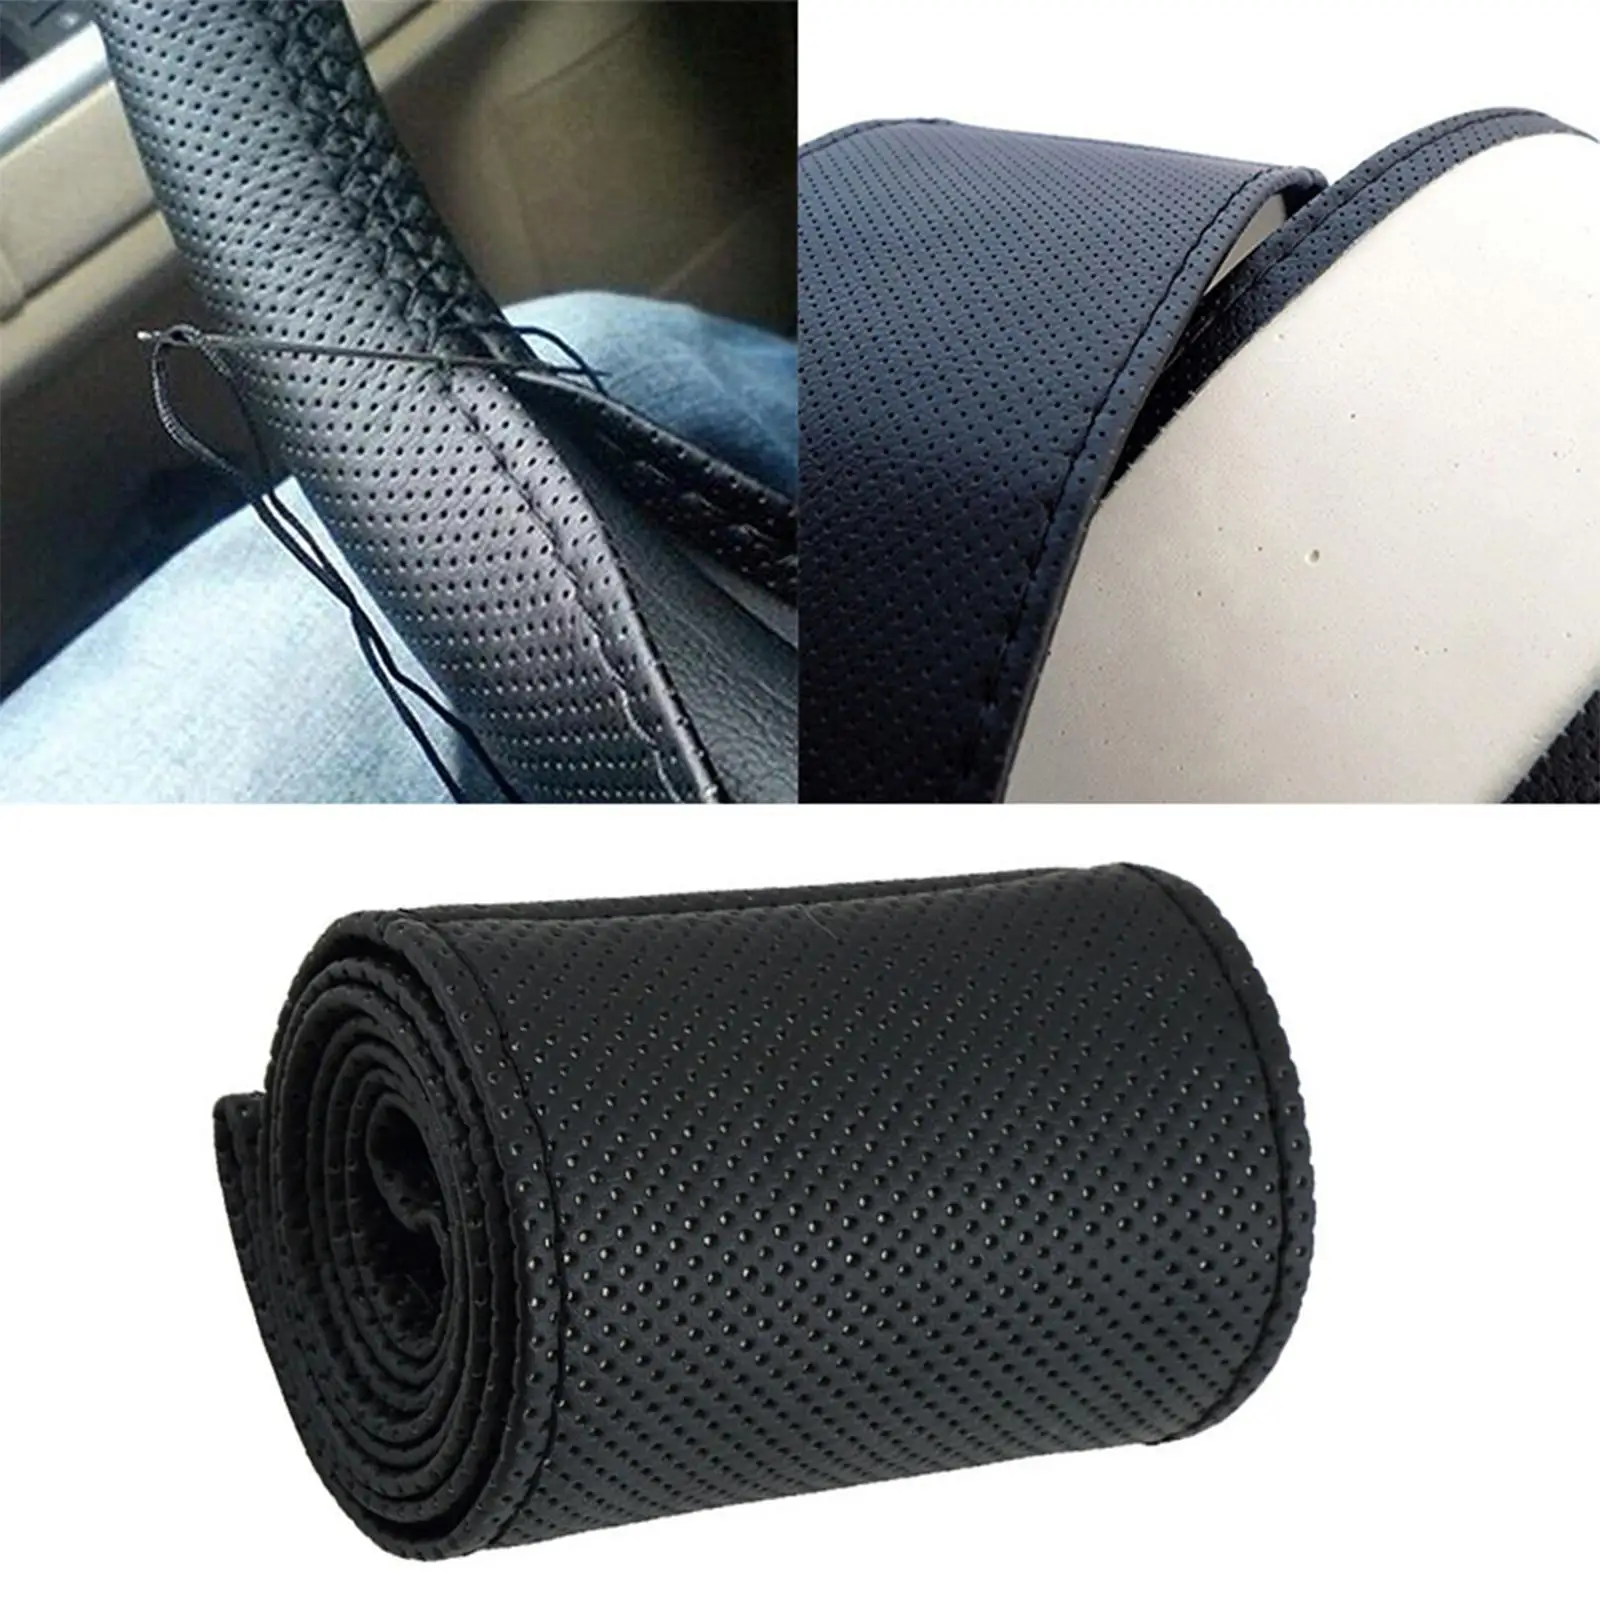 Car Steering Wheel Cover Hand Sewing with Needle Fiber Anti Slip Protector